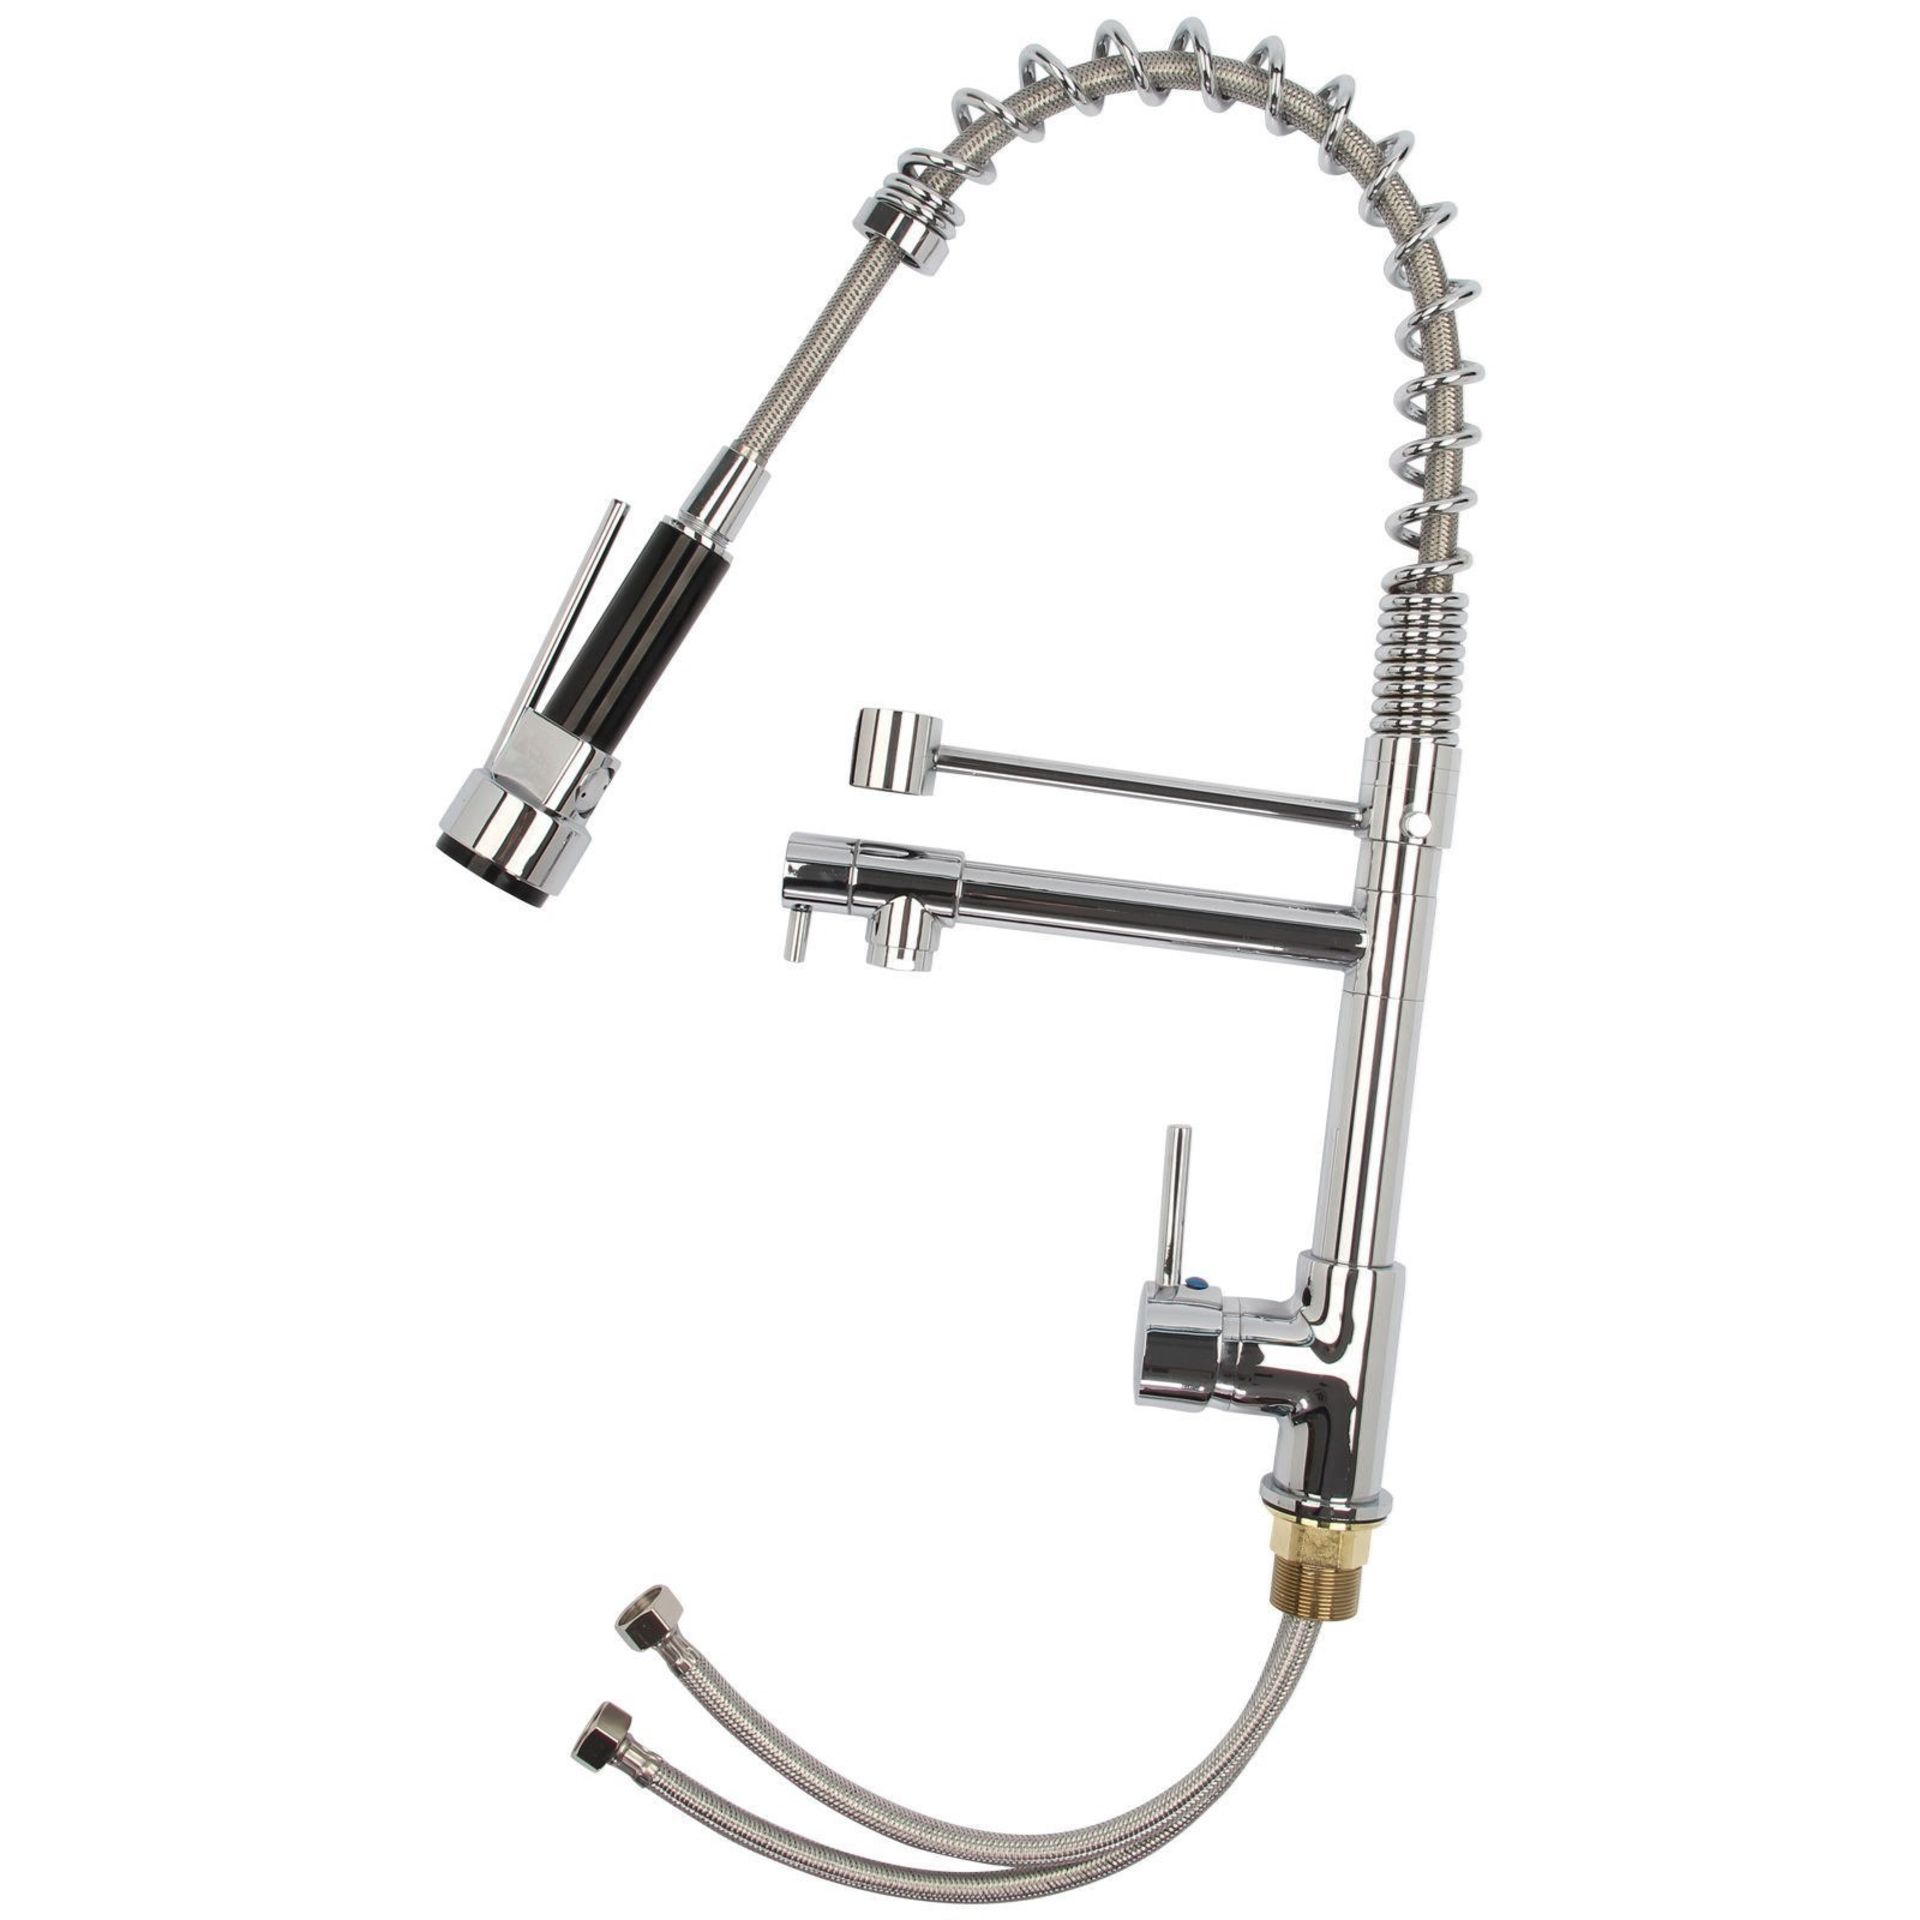 Bentley Modern Monobloc Chrome Brass Pull Out Spray Mixer Tap. RRP £349.99.This tap is from - Image 2 of 3